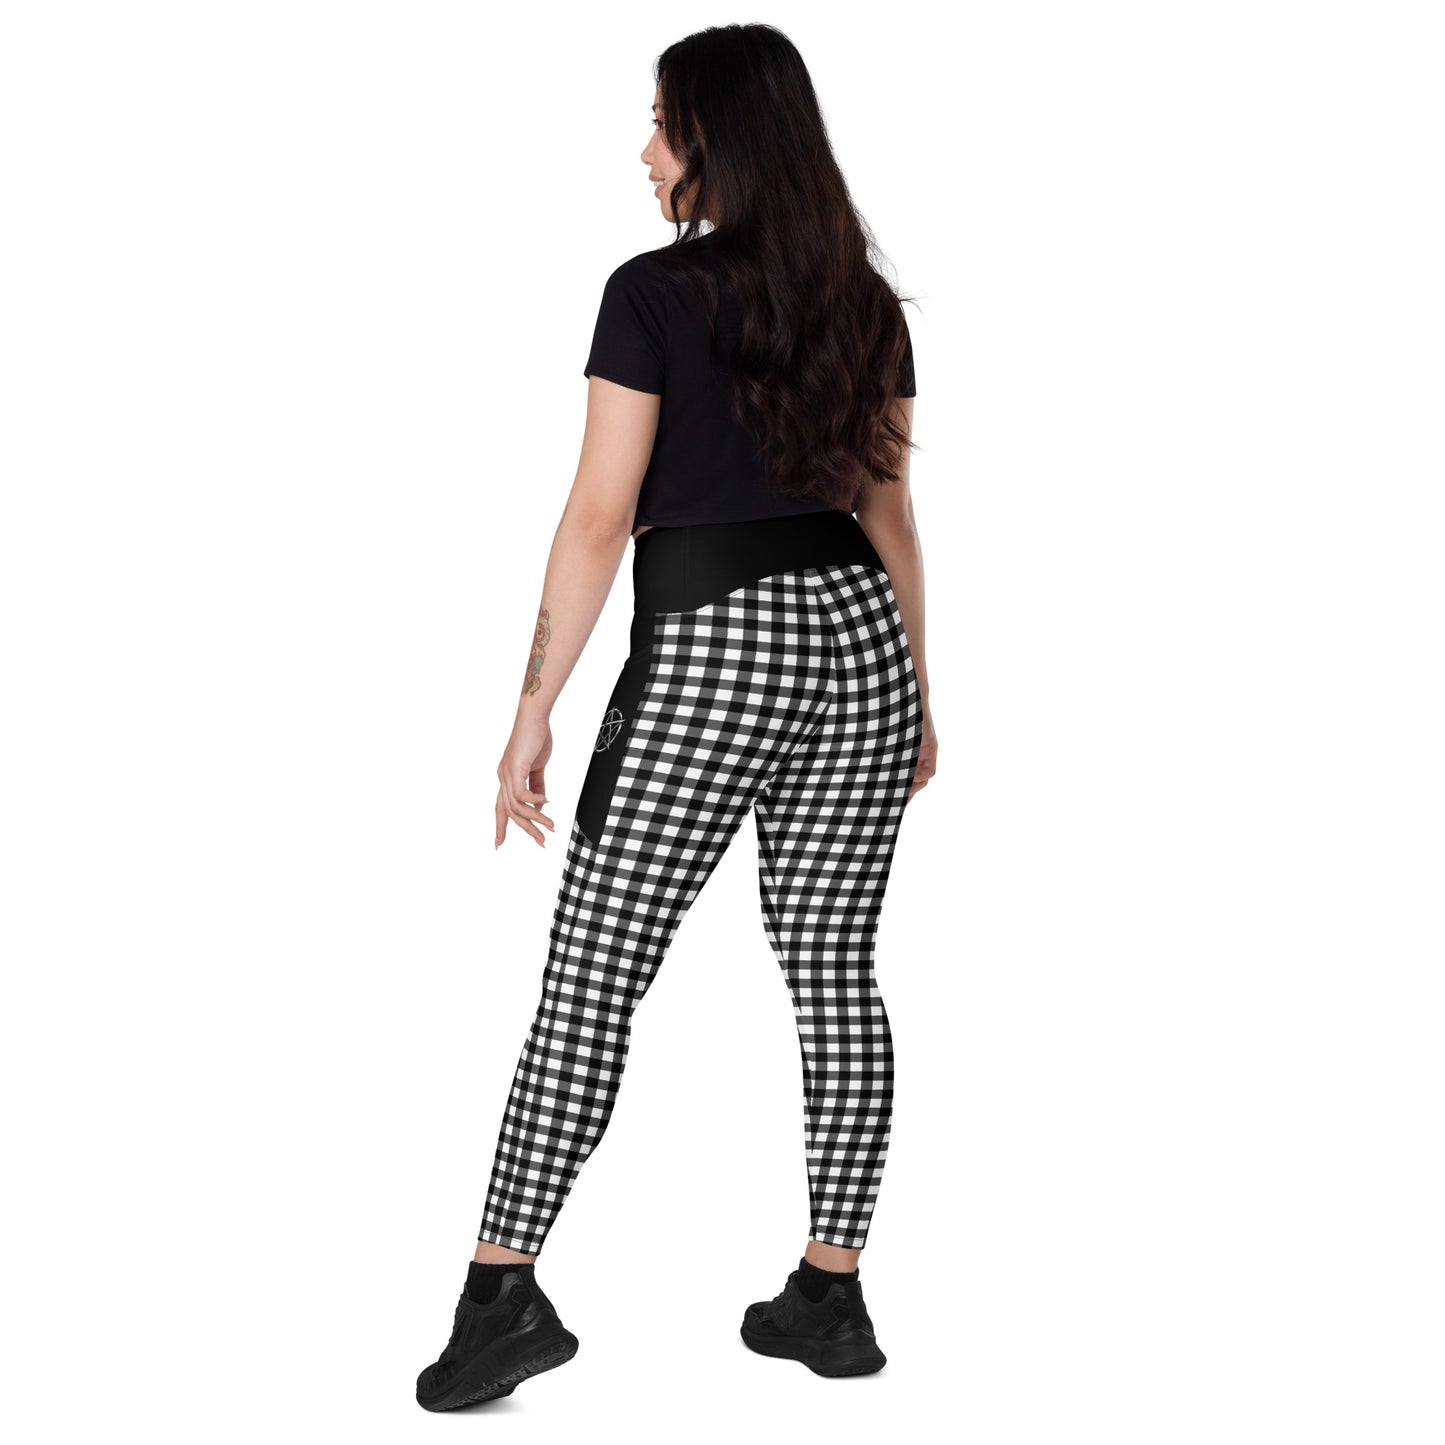 Crossover leggings with pockets Checkered Black